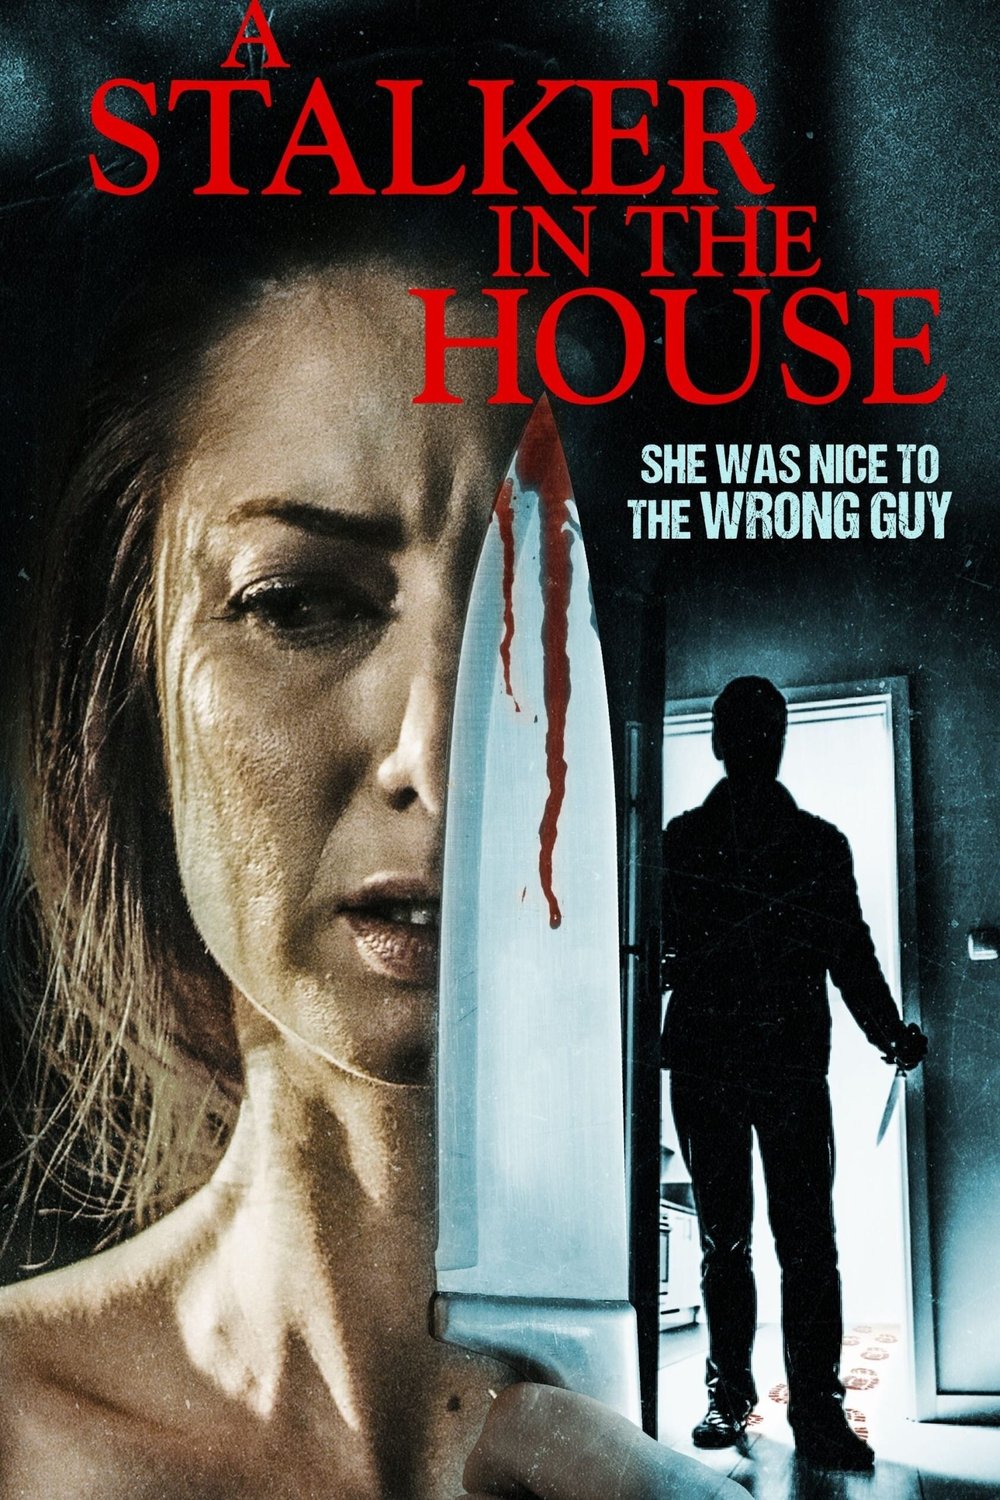 Poster of the movie A Stalker in the House